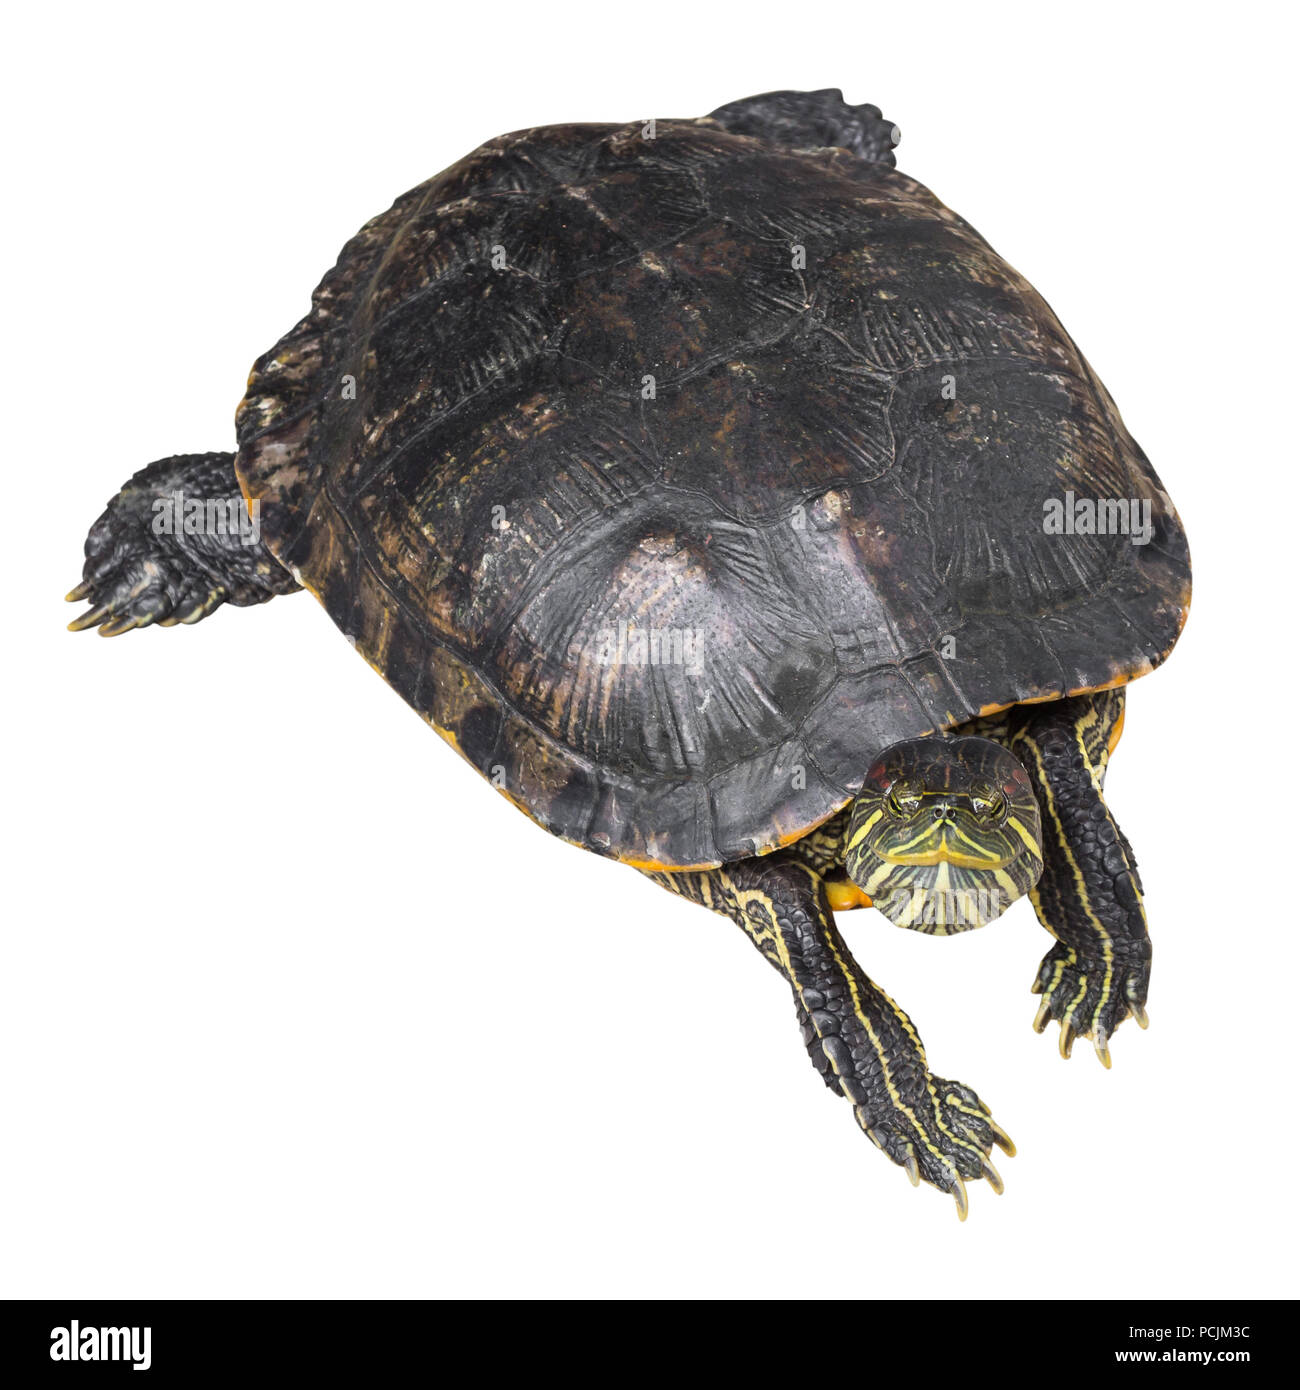 Red eared slider turtle ( Trachemys scripta elegans ) is creeping and raise one's head on white isolated background . Top view . Stock Photo